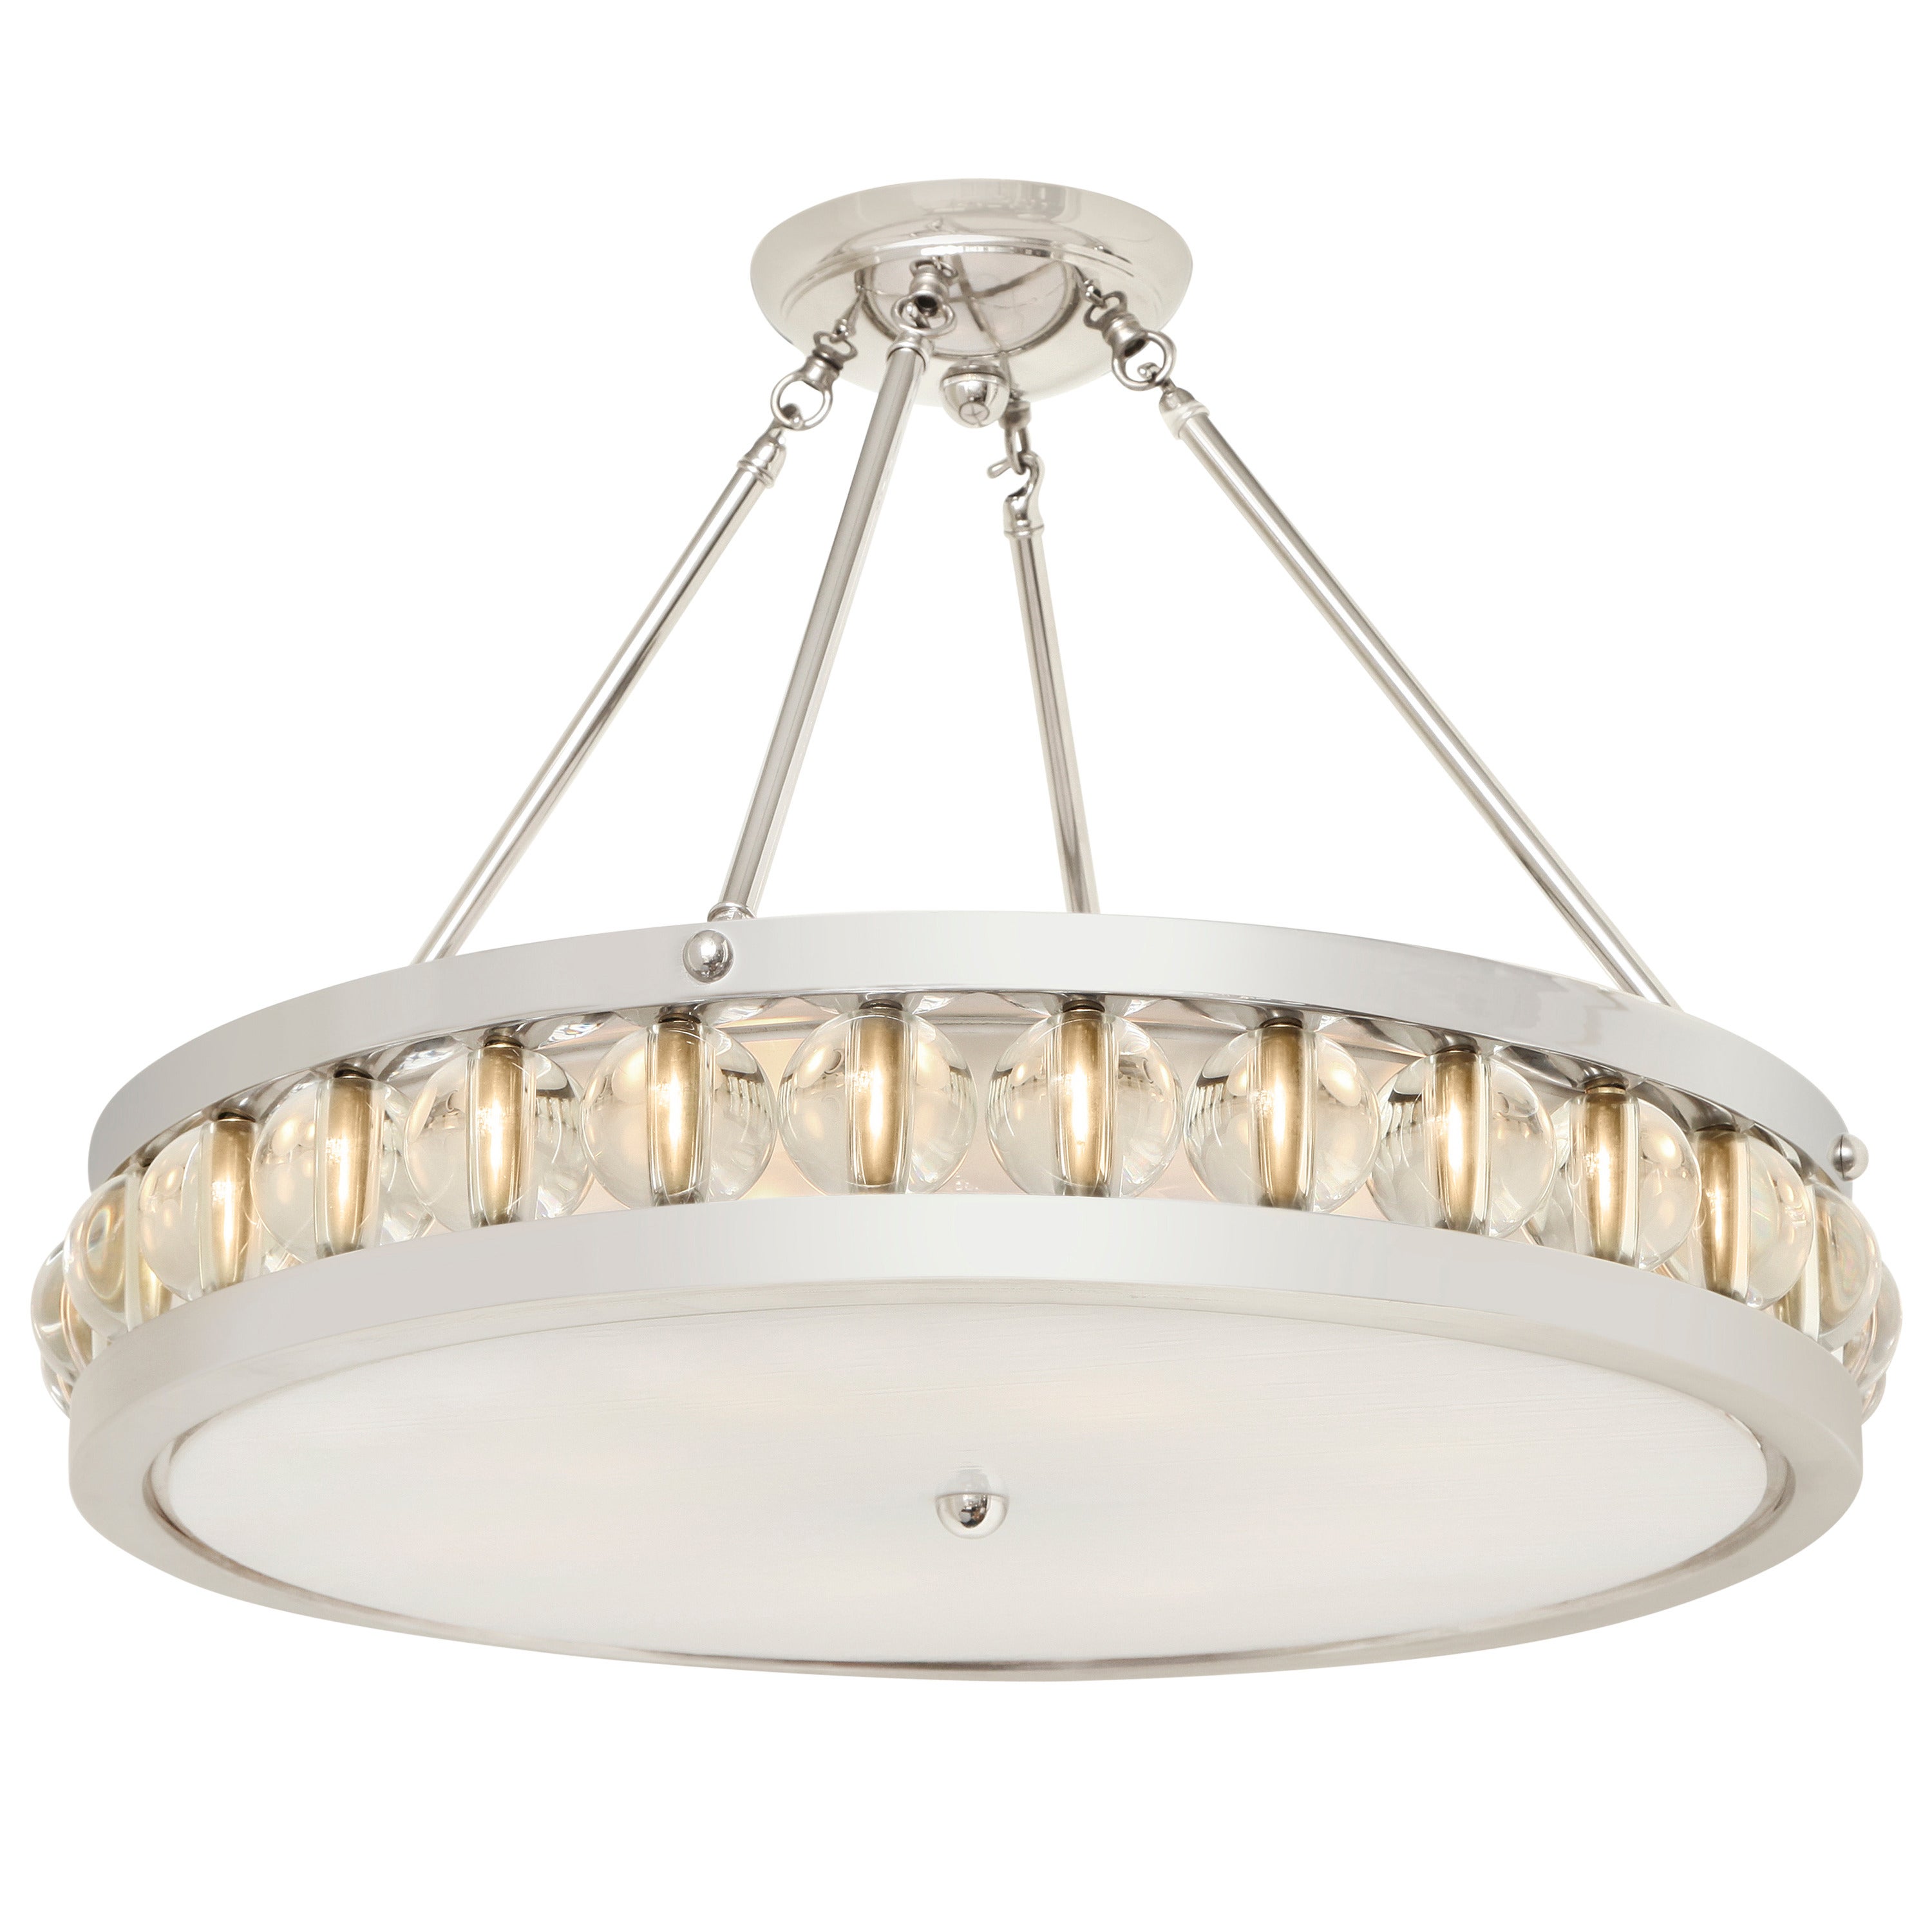 Tambour Pendant Fixture with Rods by David Duncan, Polished Nickel, 24" Frame For Sale